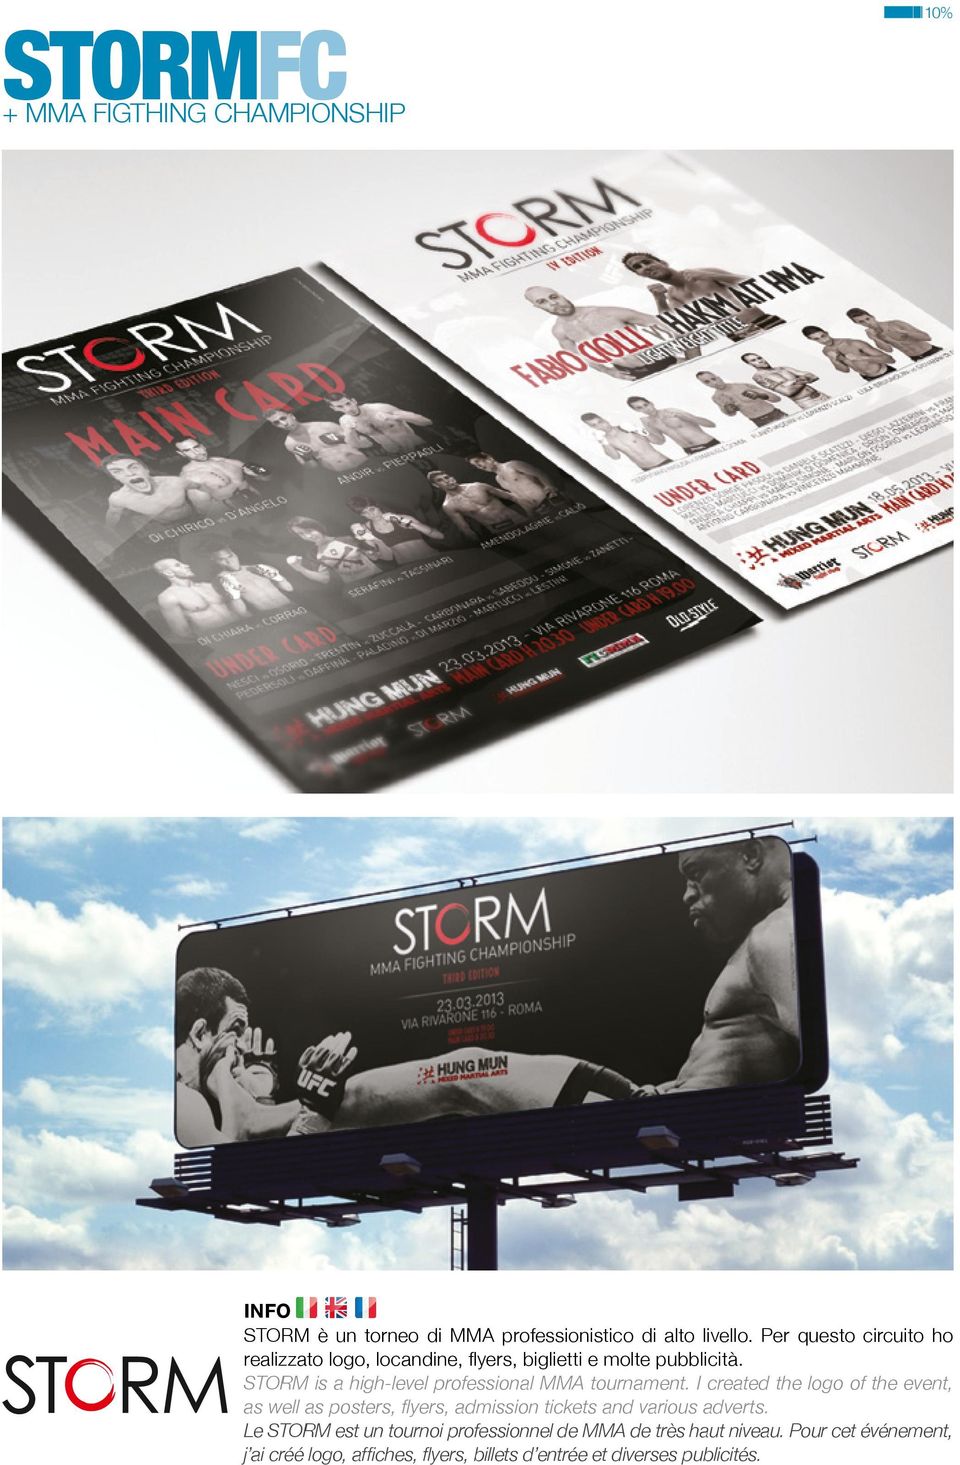 STORM is a high-level professional MMA tournament.